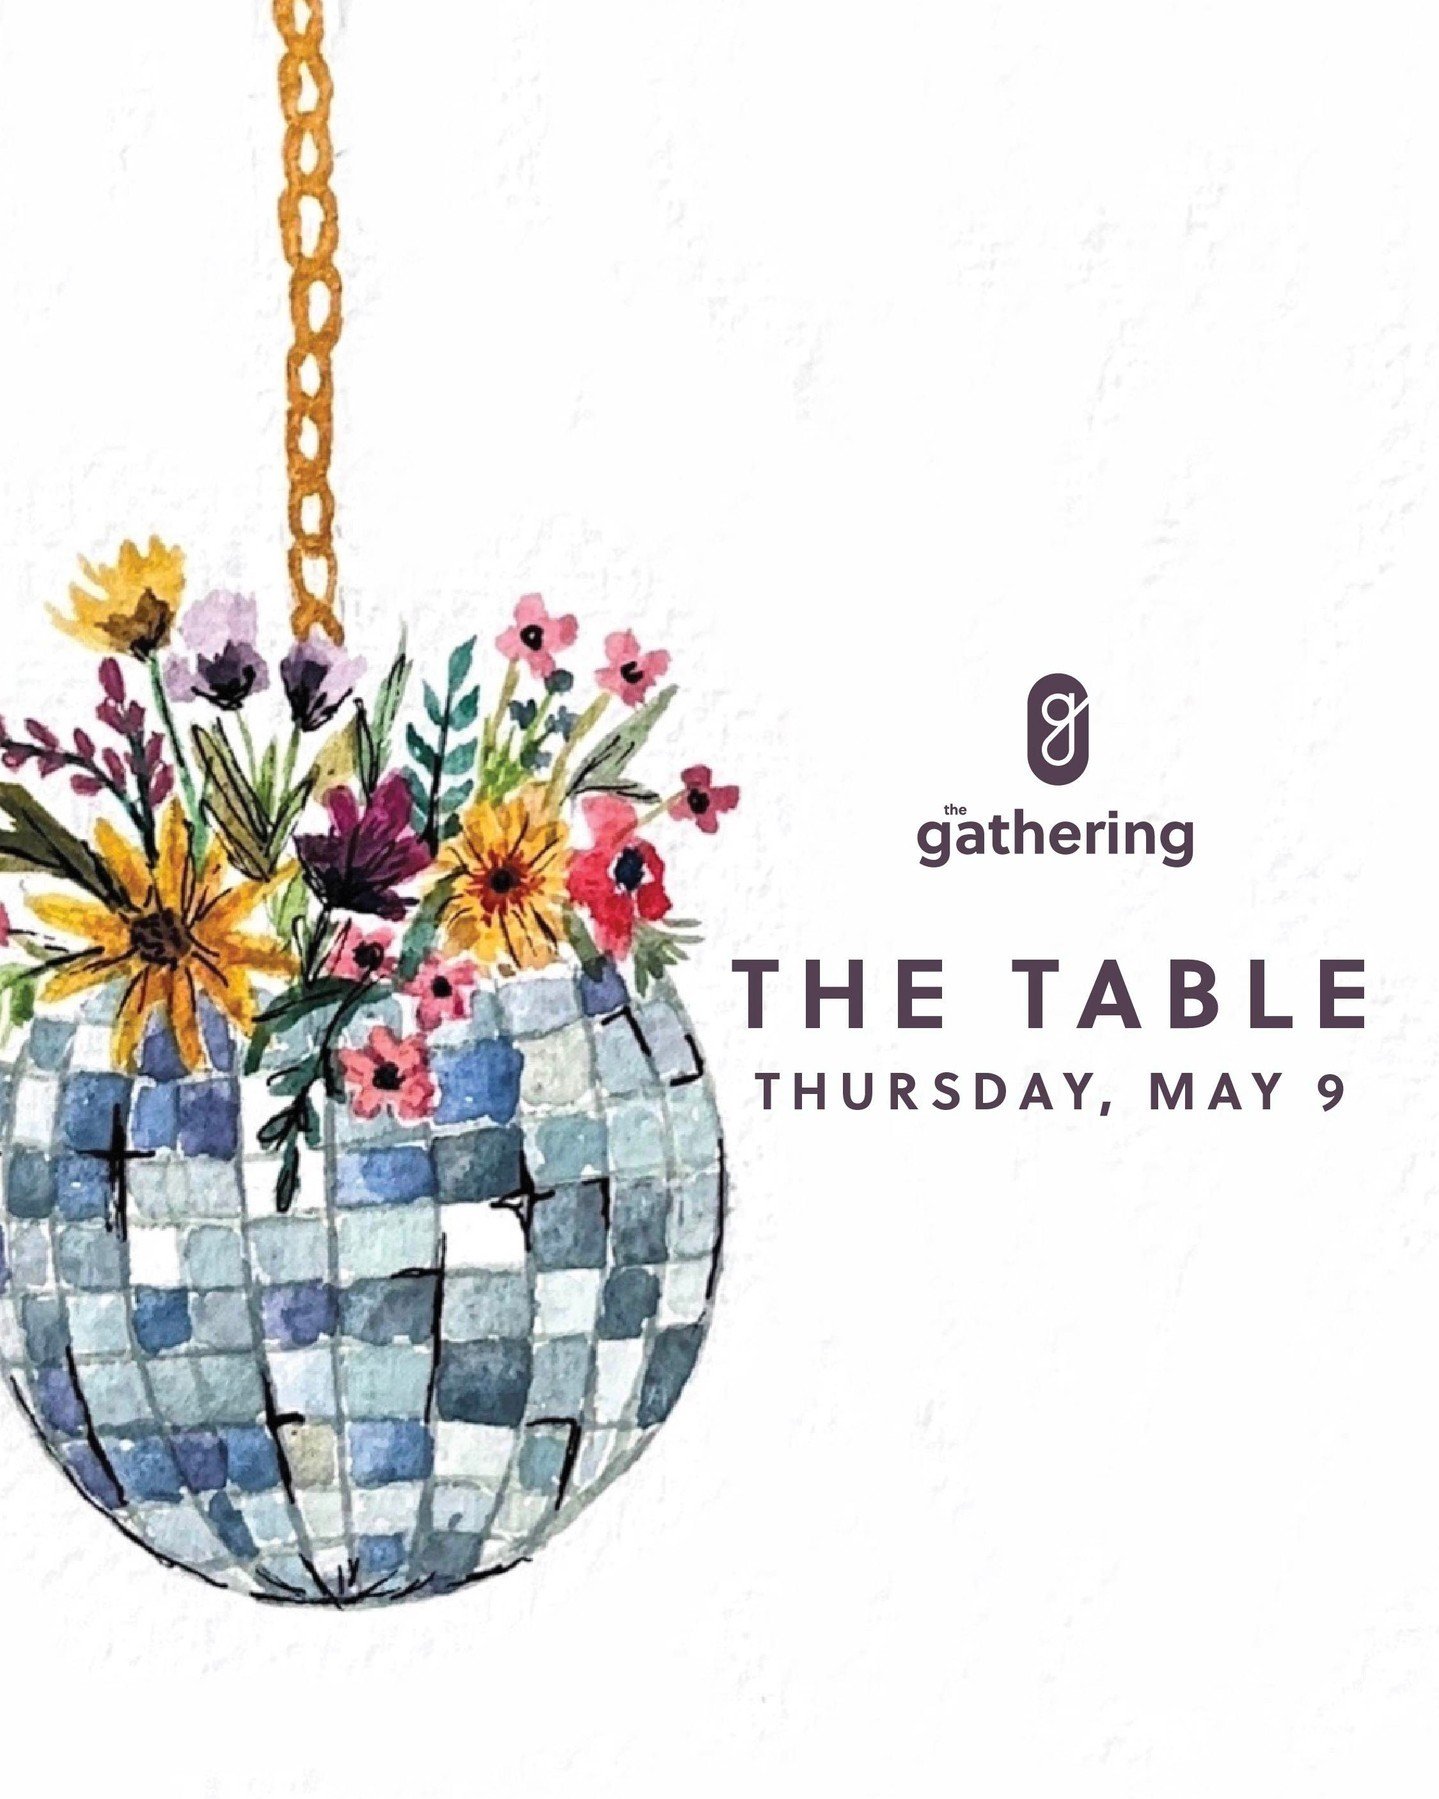 Welcome to The Gathering, we saved you a seat! 🪩 #changedliveschanginglives 

Our women's ministry, The Gathering, is hosting their monthly event called The Table!

This month is Decades Night, come dressed in your most meaningful decade and join us